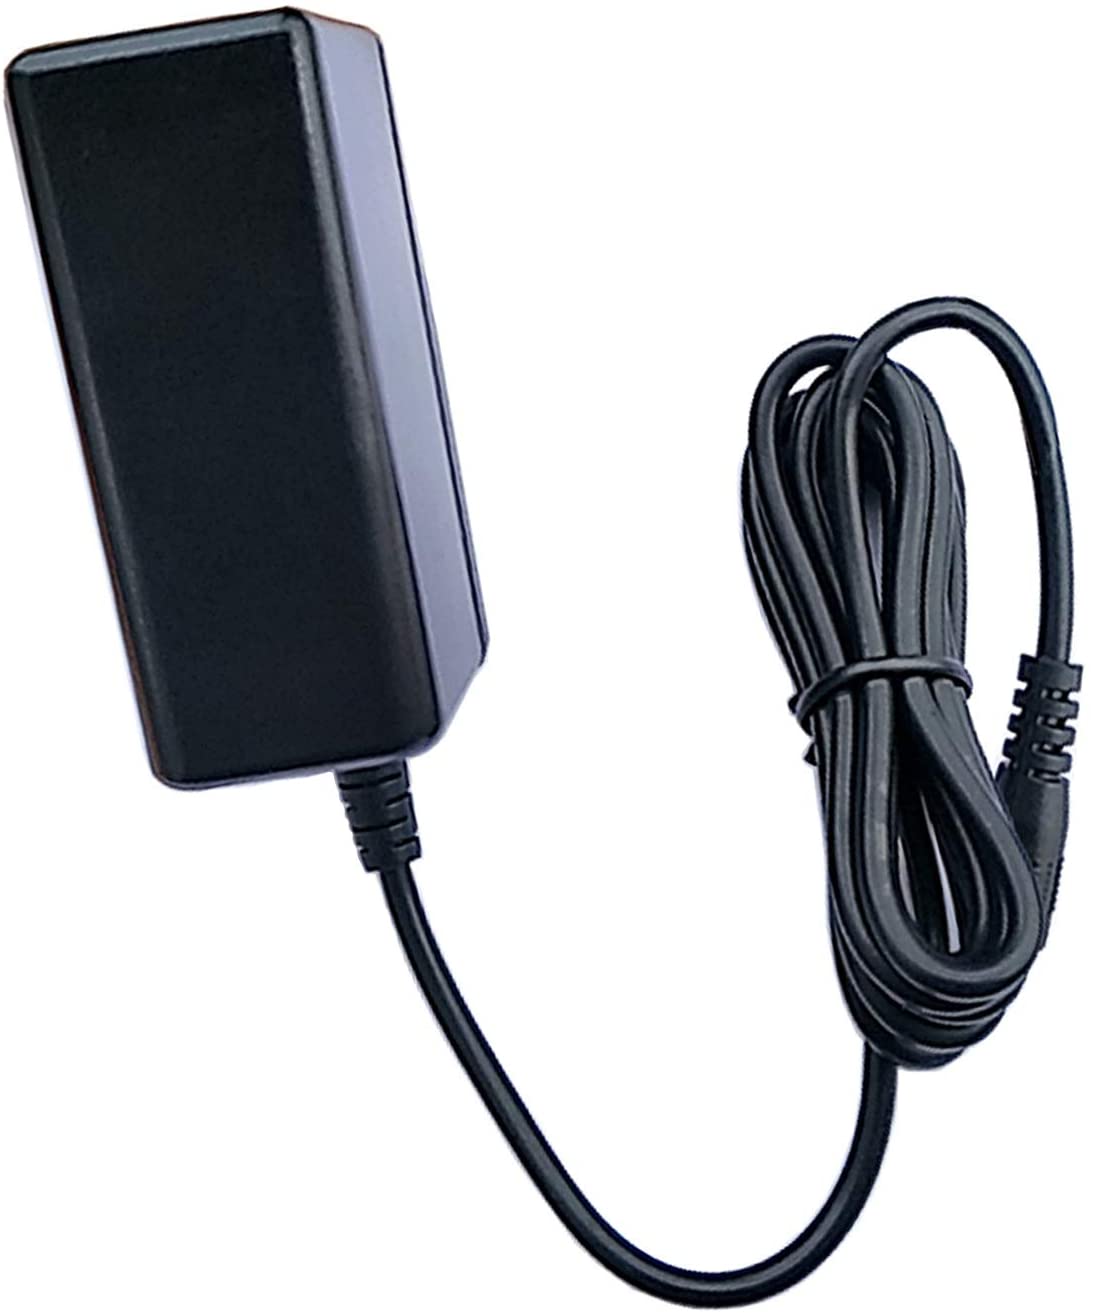 UPBRIGHT Adapter For DigiTech JamMan Solo Looper Guitar Effects Pedal Power Supply Cord Charger PSU - image 3 of 5